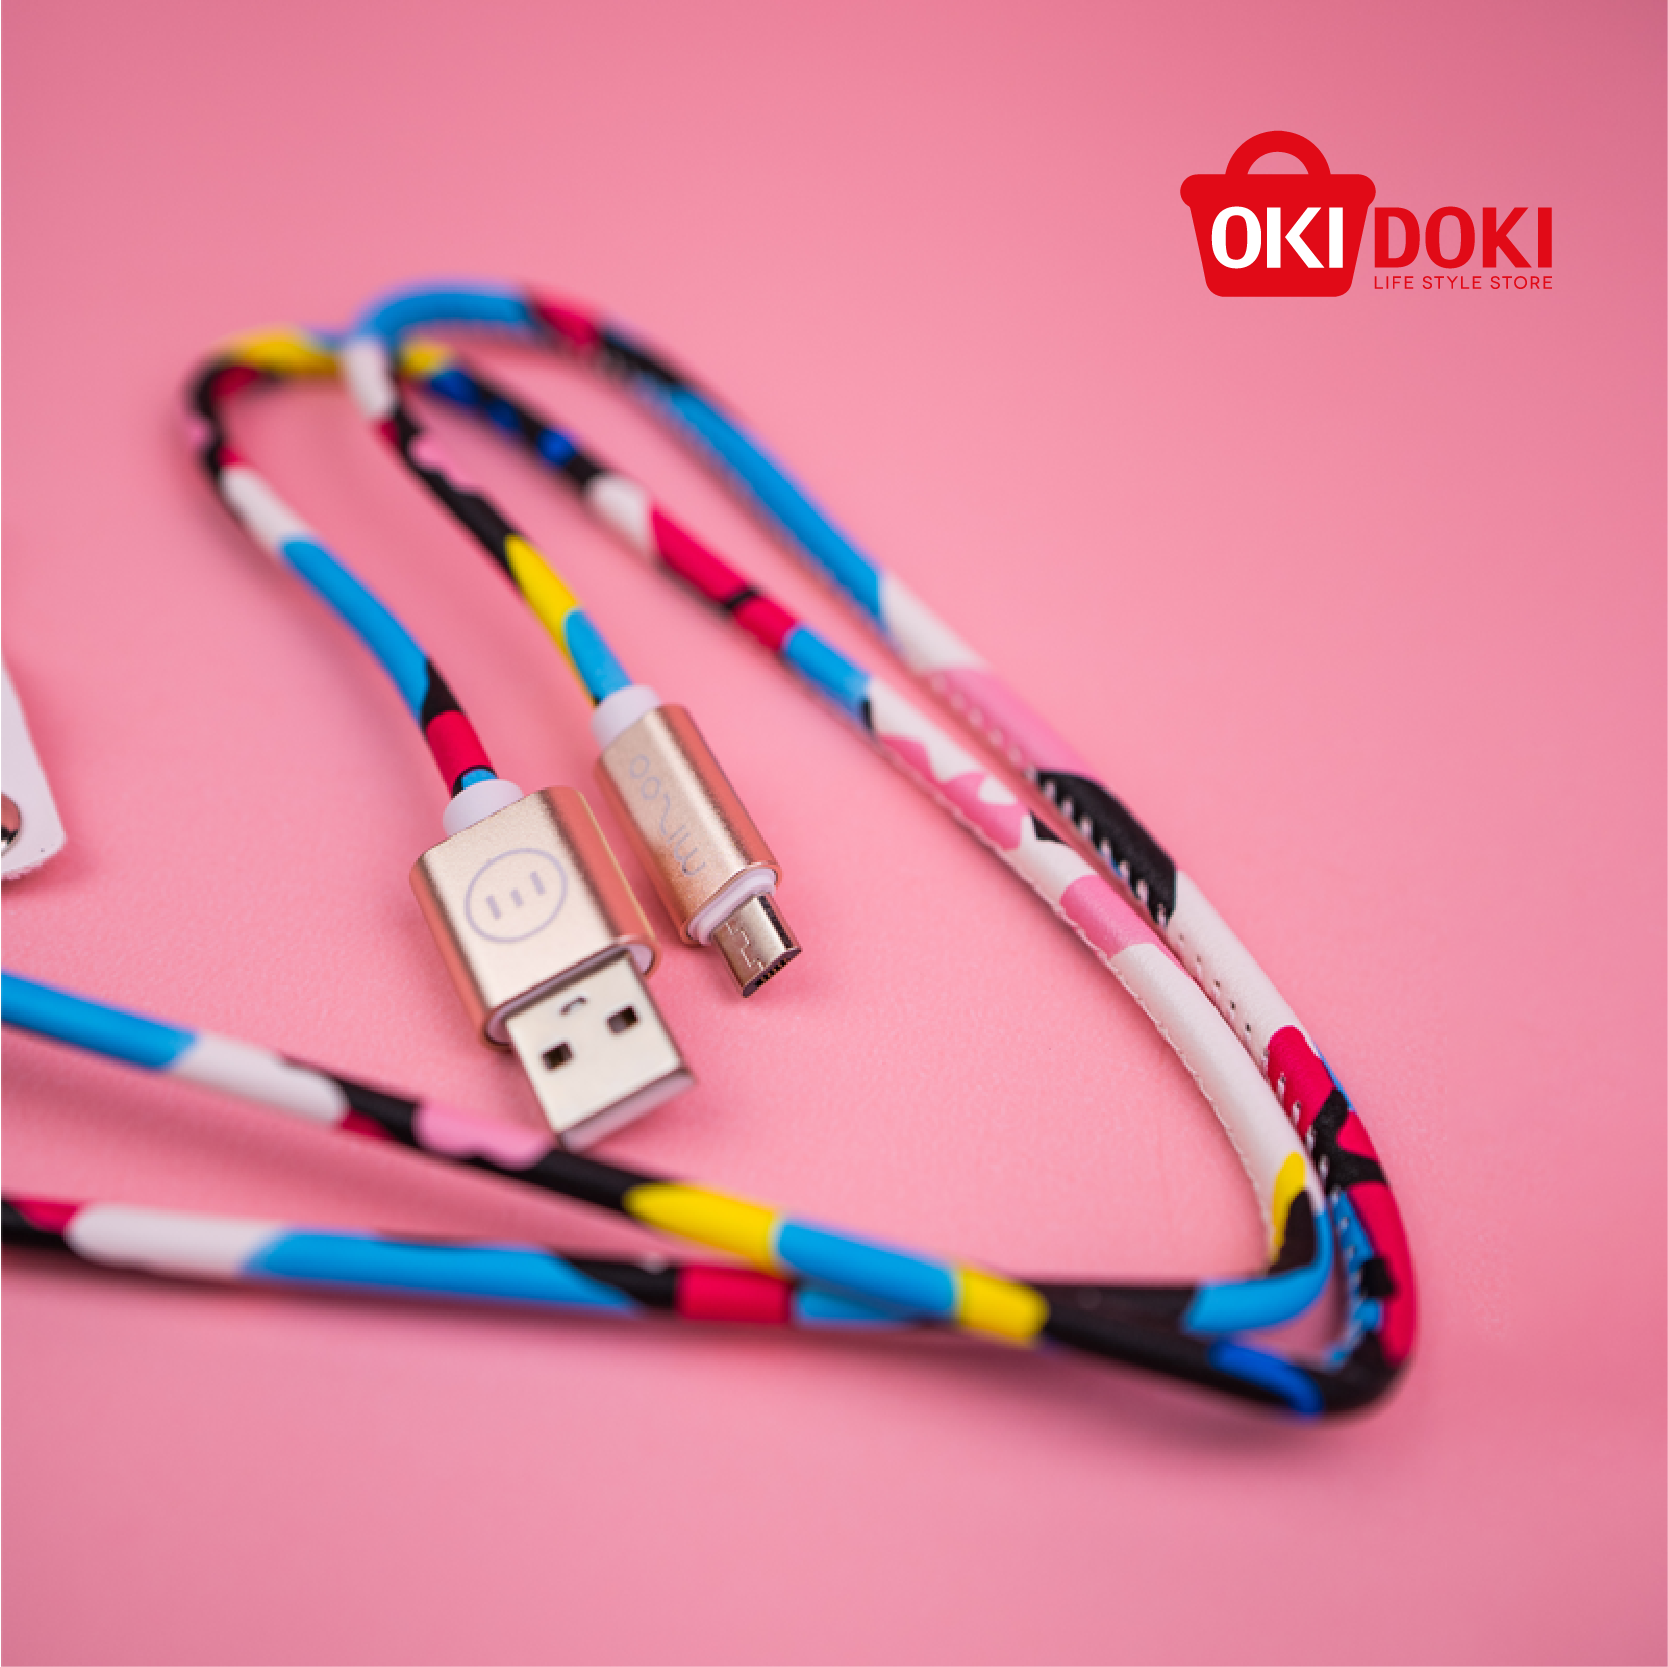 Cable cargador android – OkiDoki Store